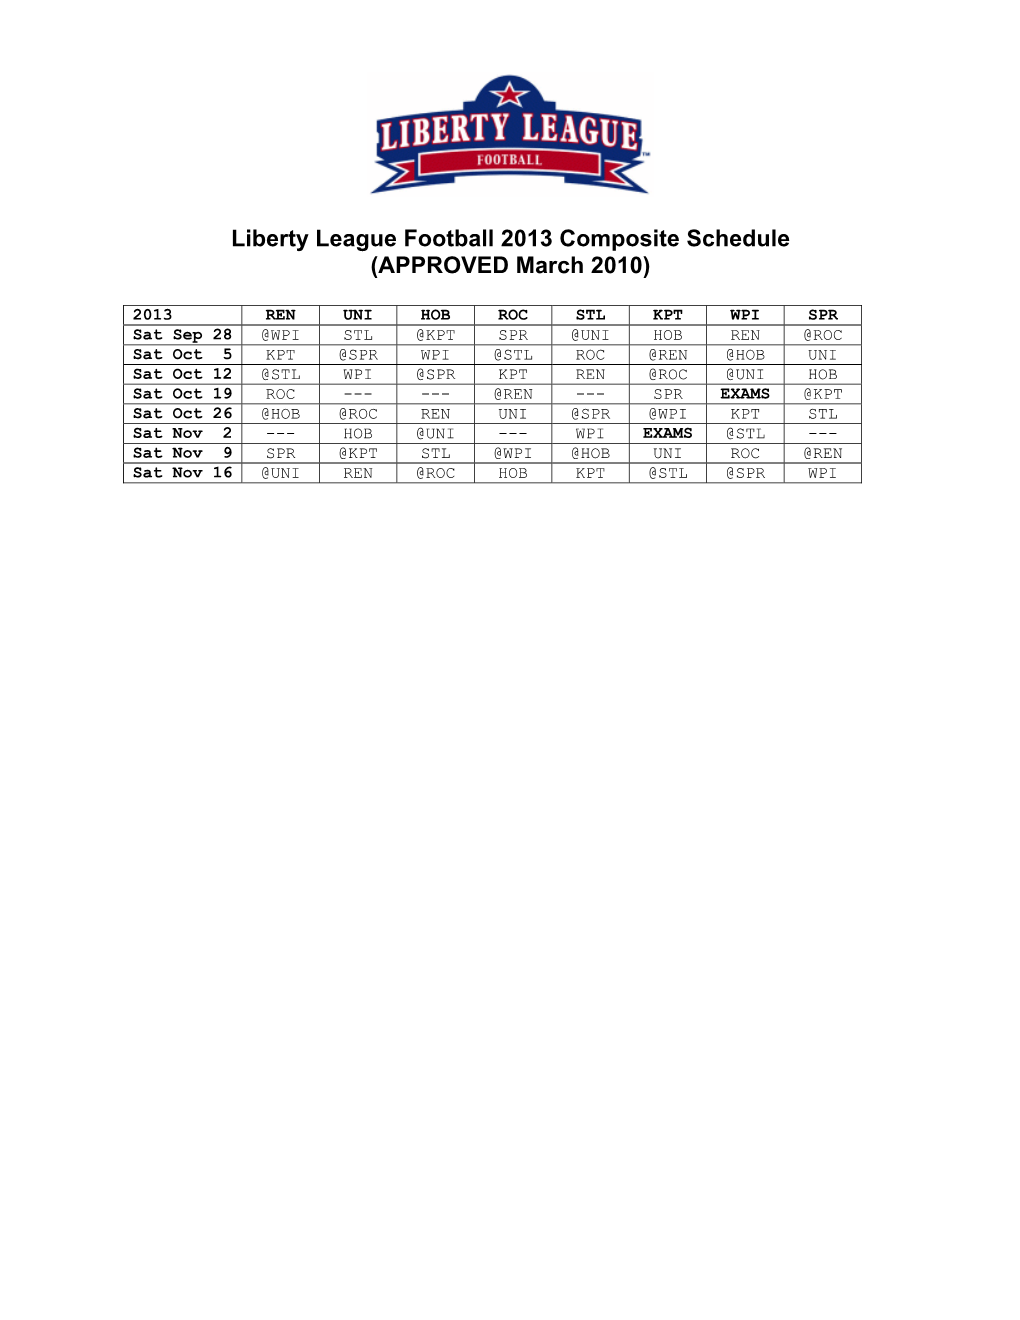 Liberty League Football 2013 Composite Schedule (APPROVED March 2010)